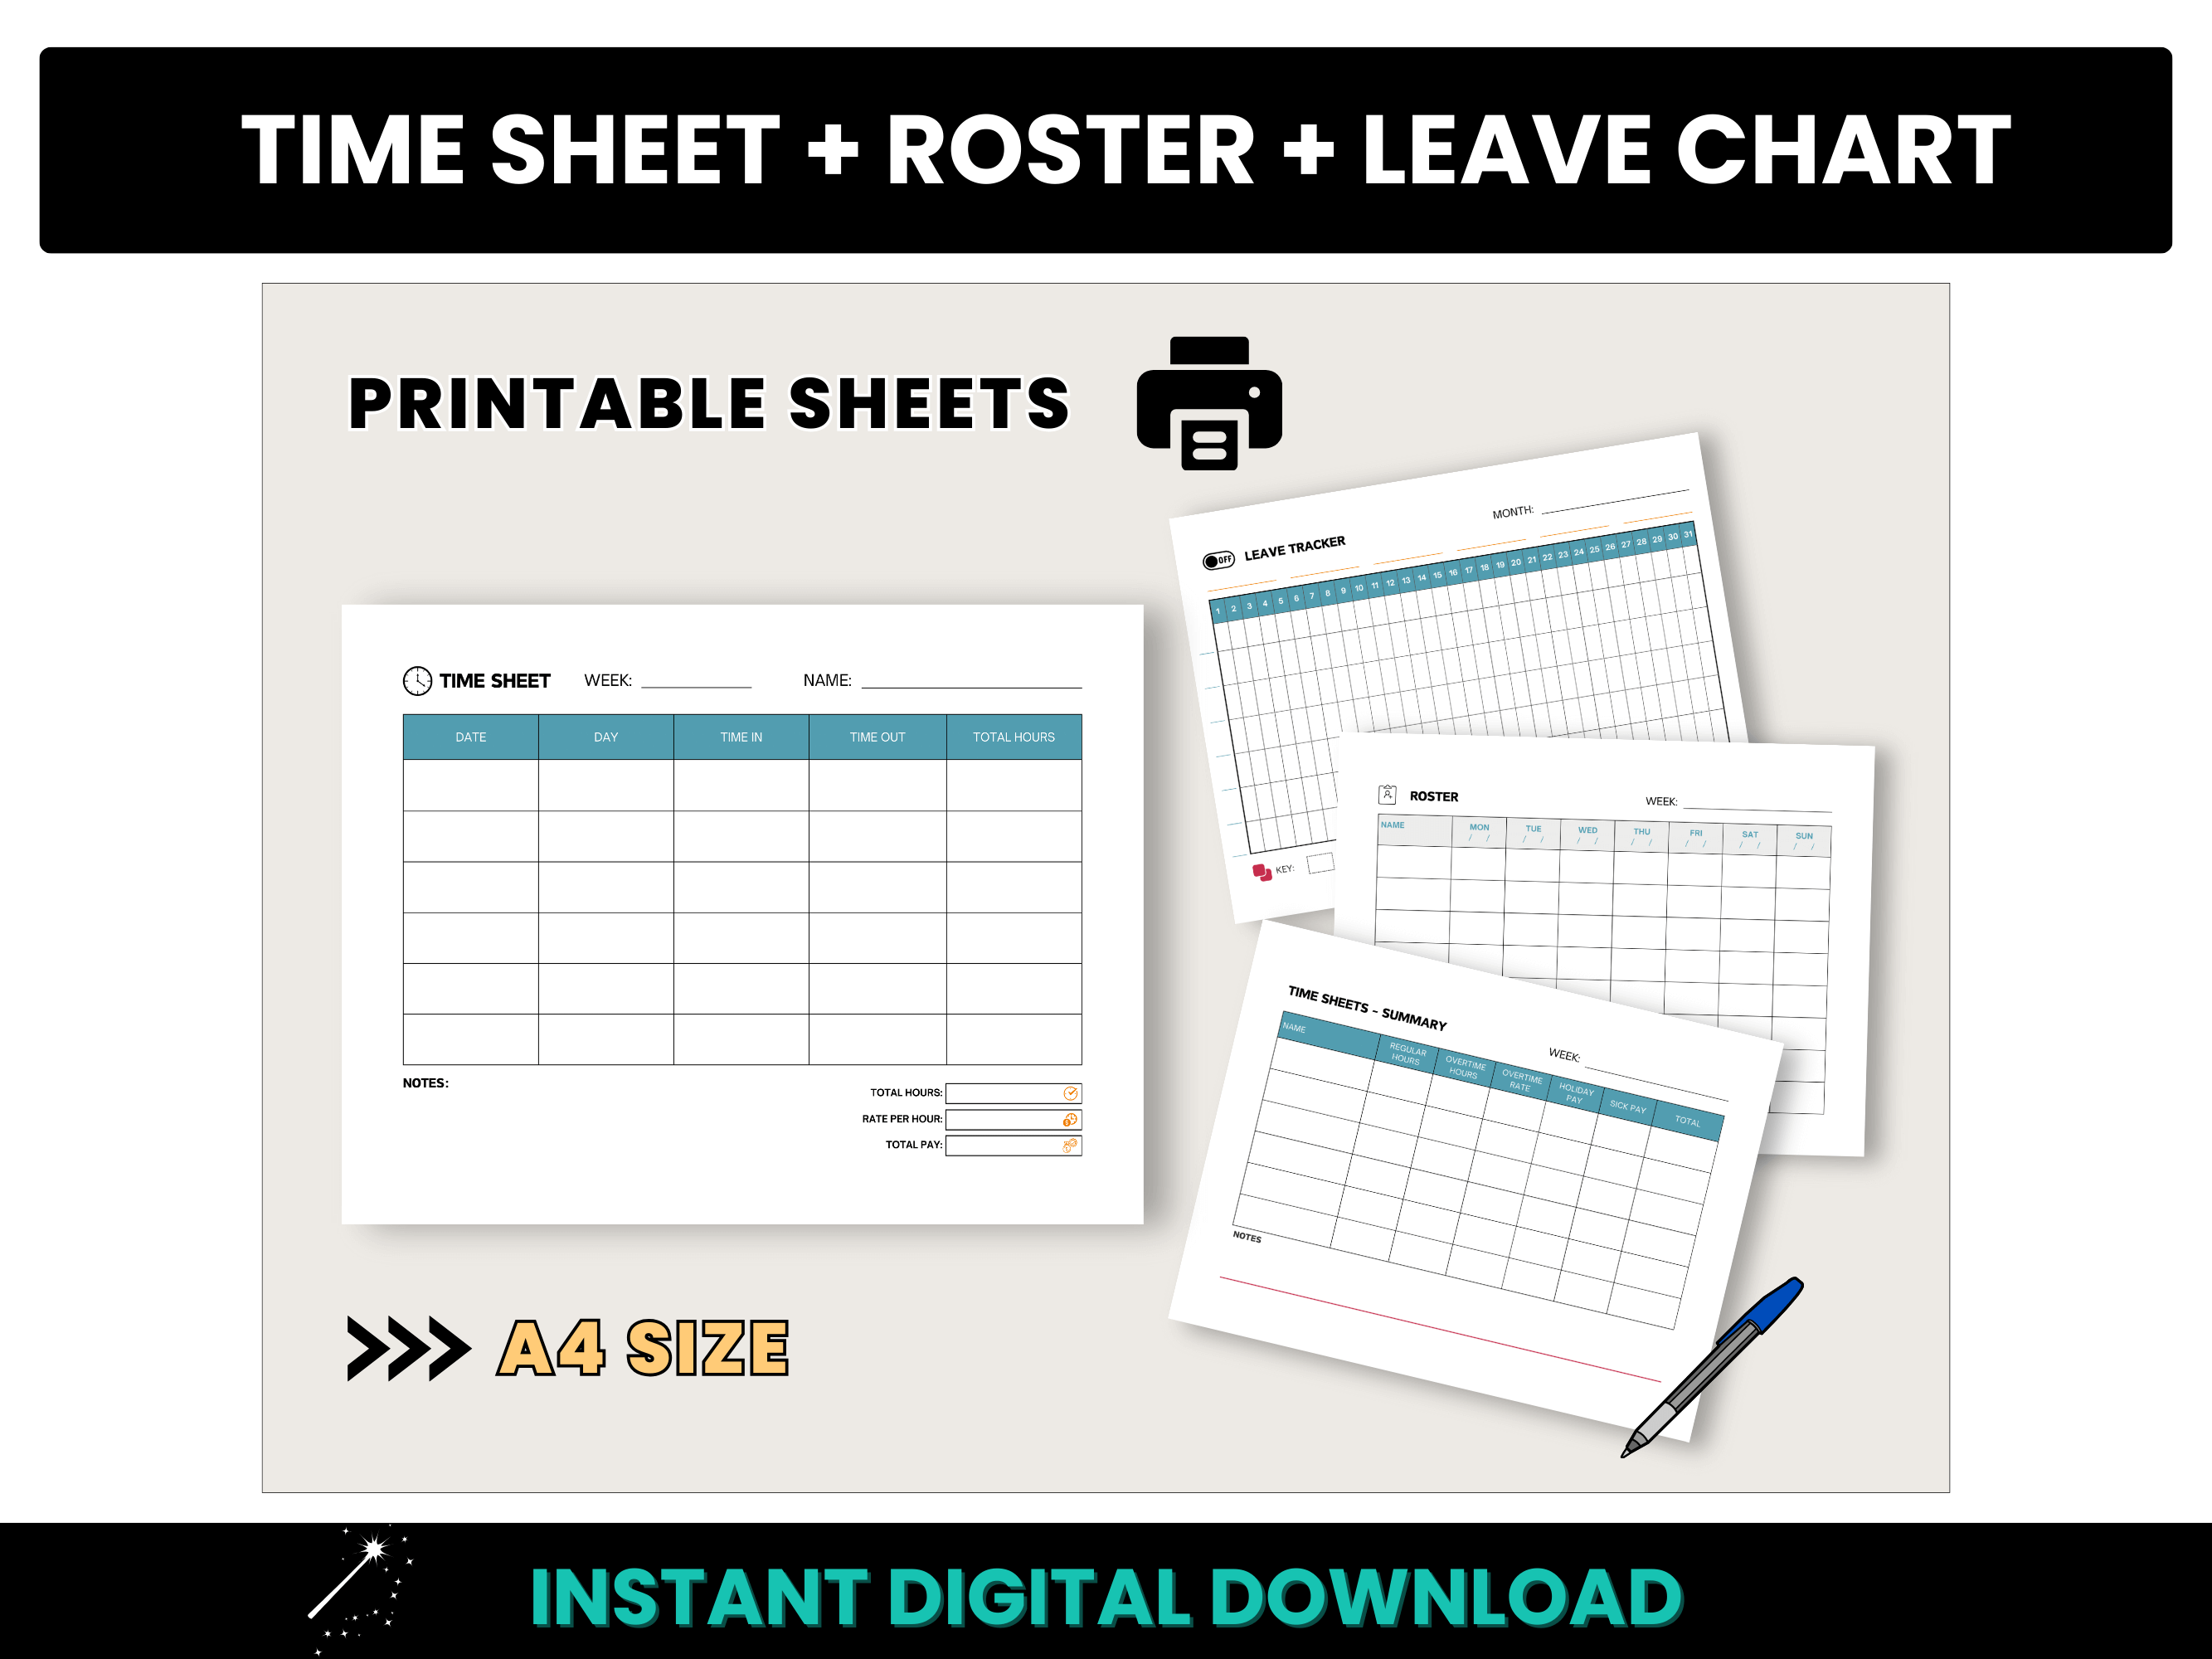 A4 Size Time Sheet, Roster & Leave Chart Printable Sheets